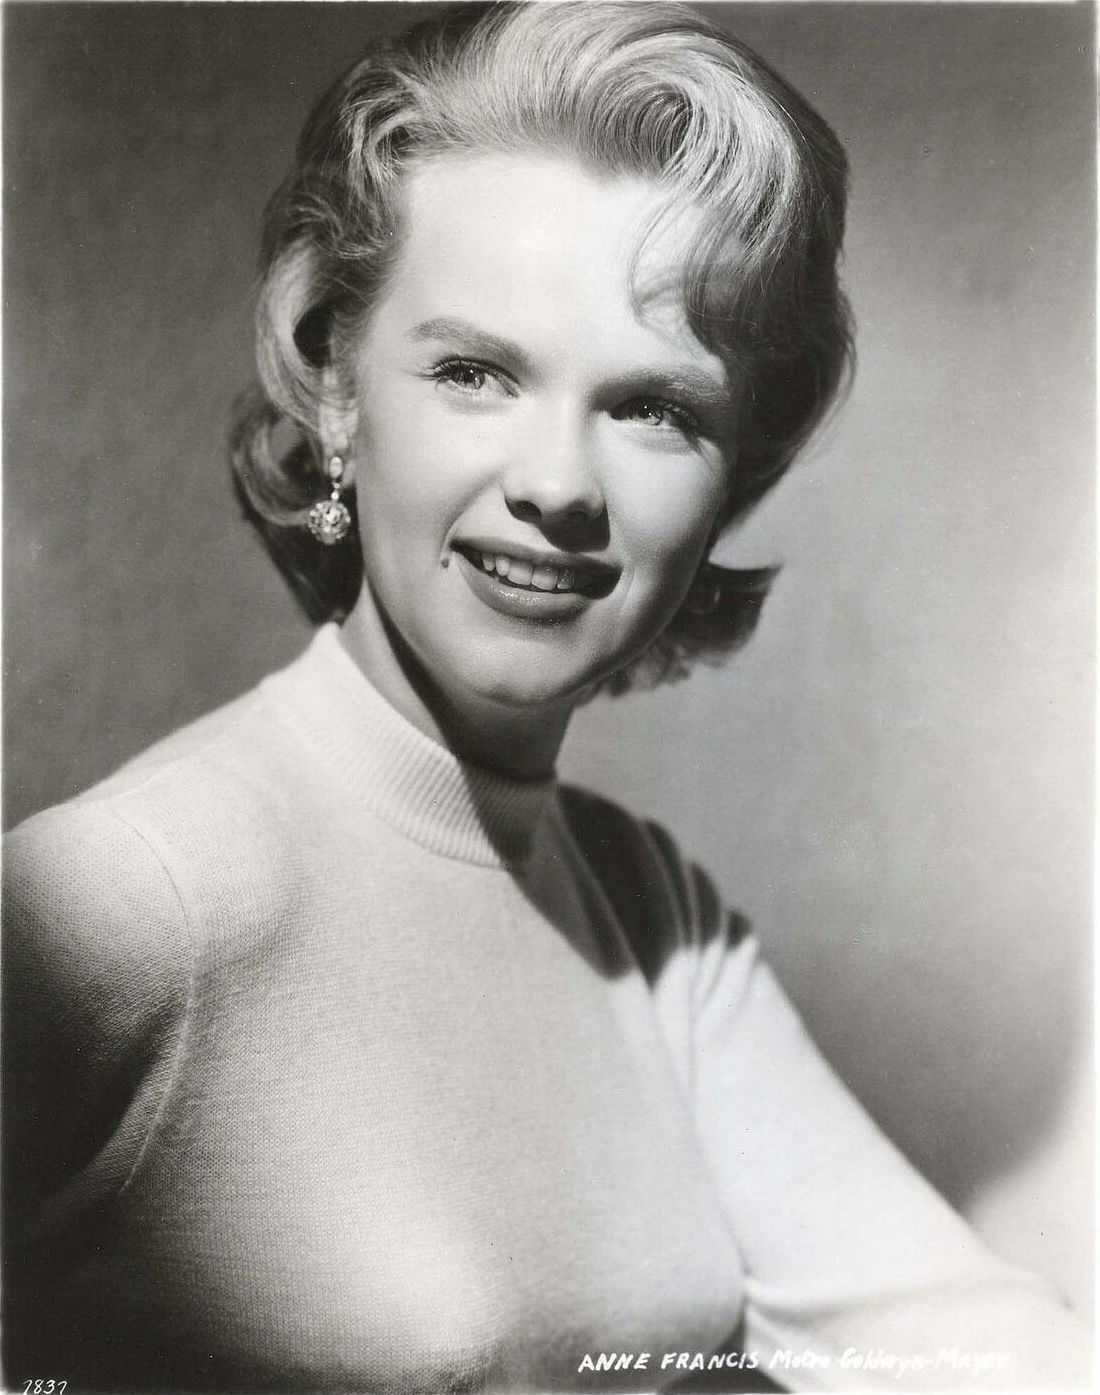 Sweater Girl: Anne Francis.